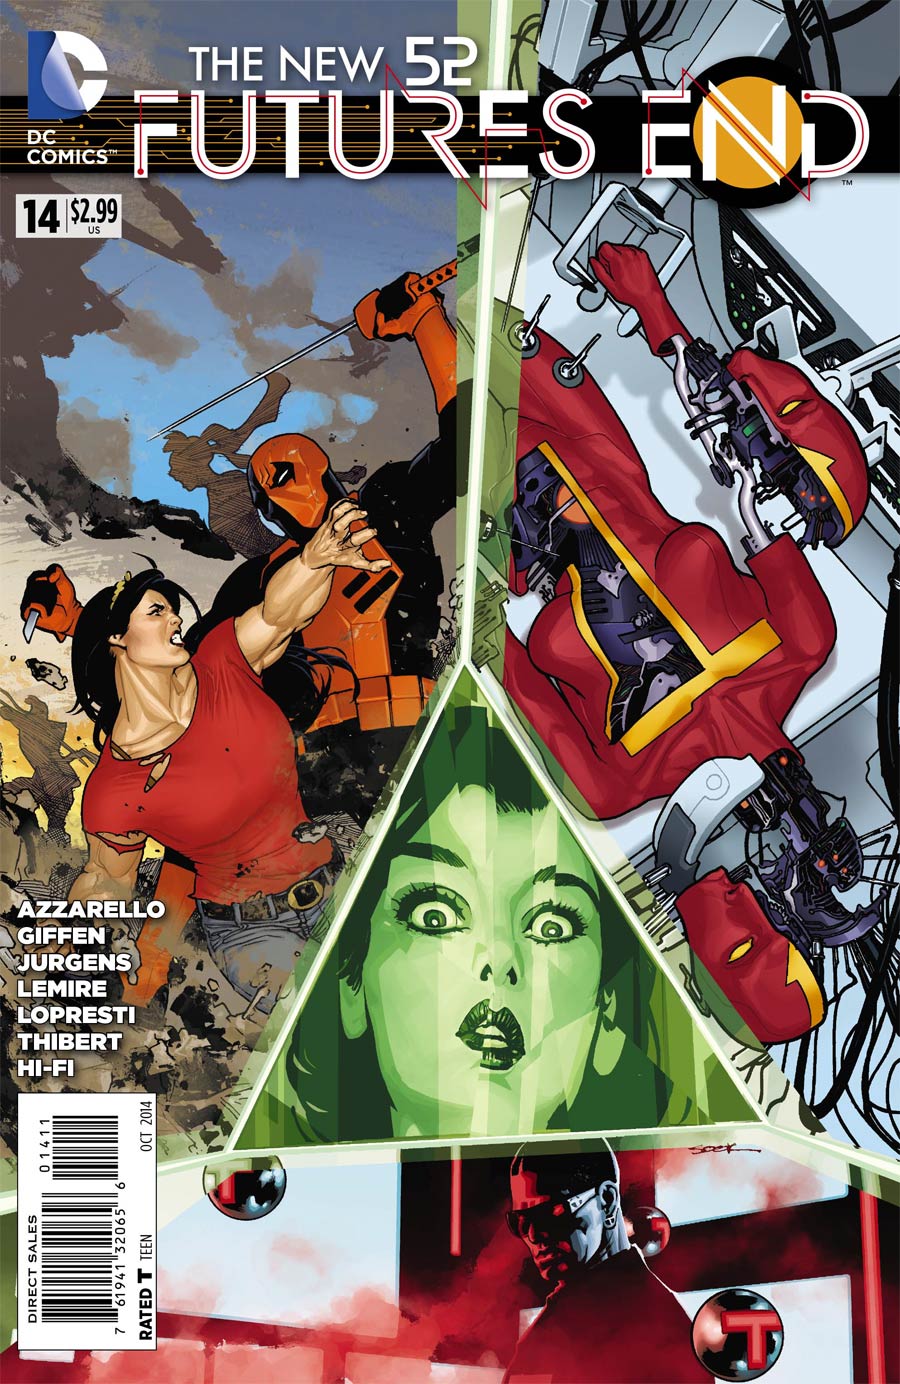 New 52 Futures End #14